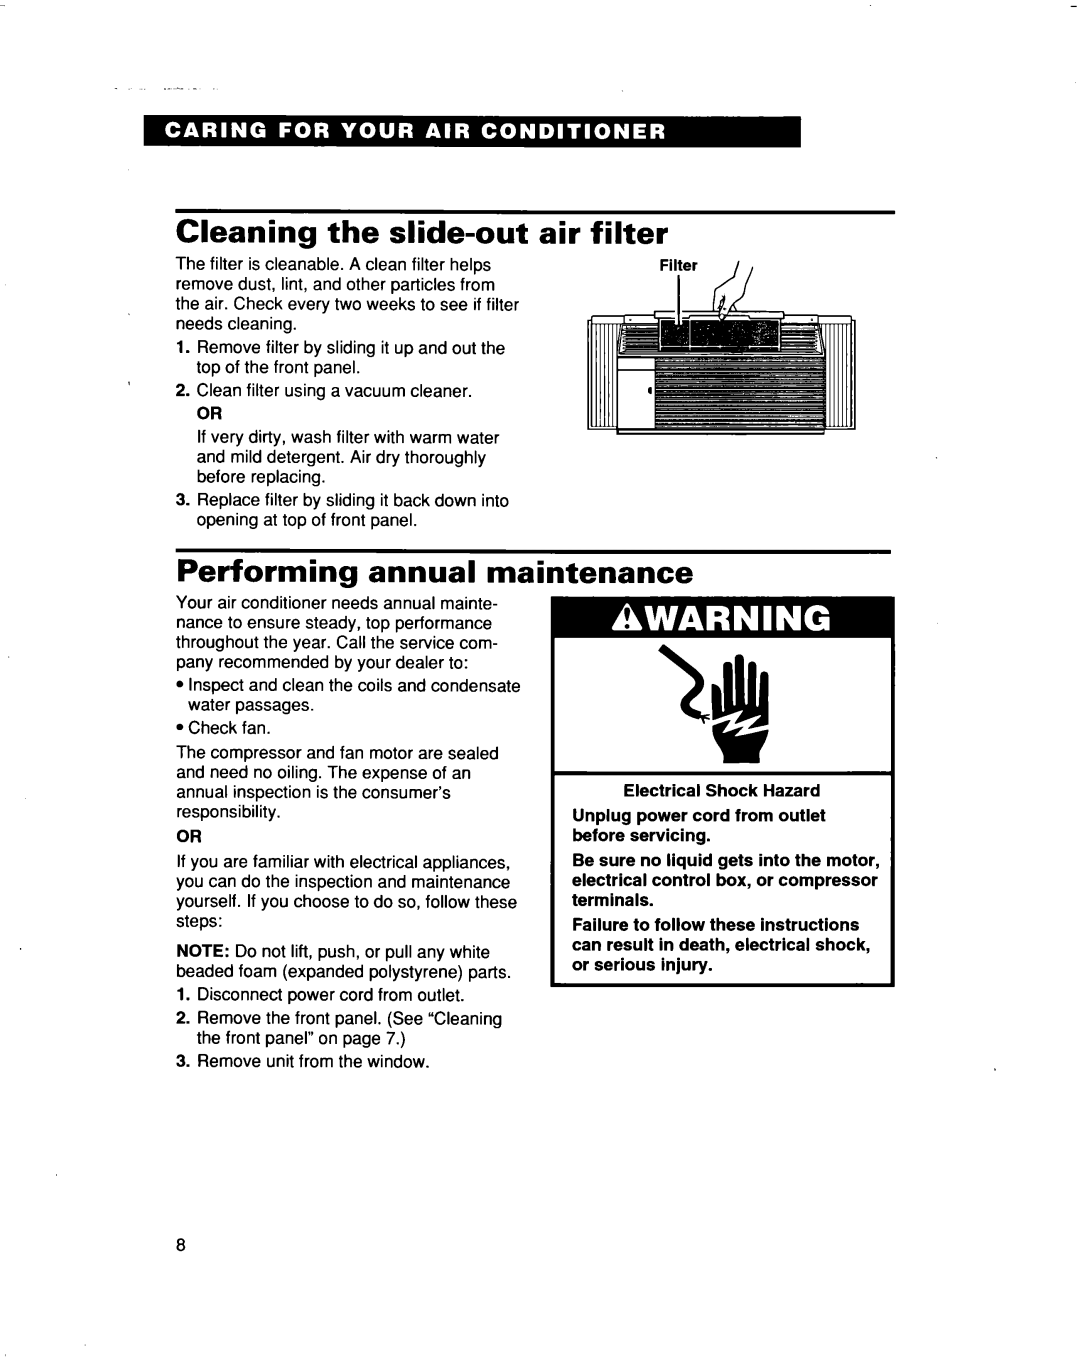 Whirlpool ACQ052 ACQ062 warranty Cleaning the slide-outair filter, Performing annual maintenance 